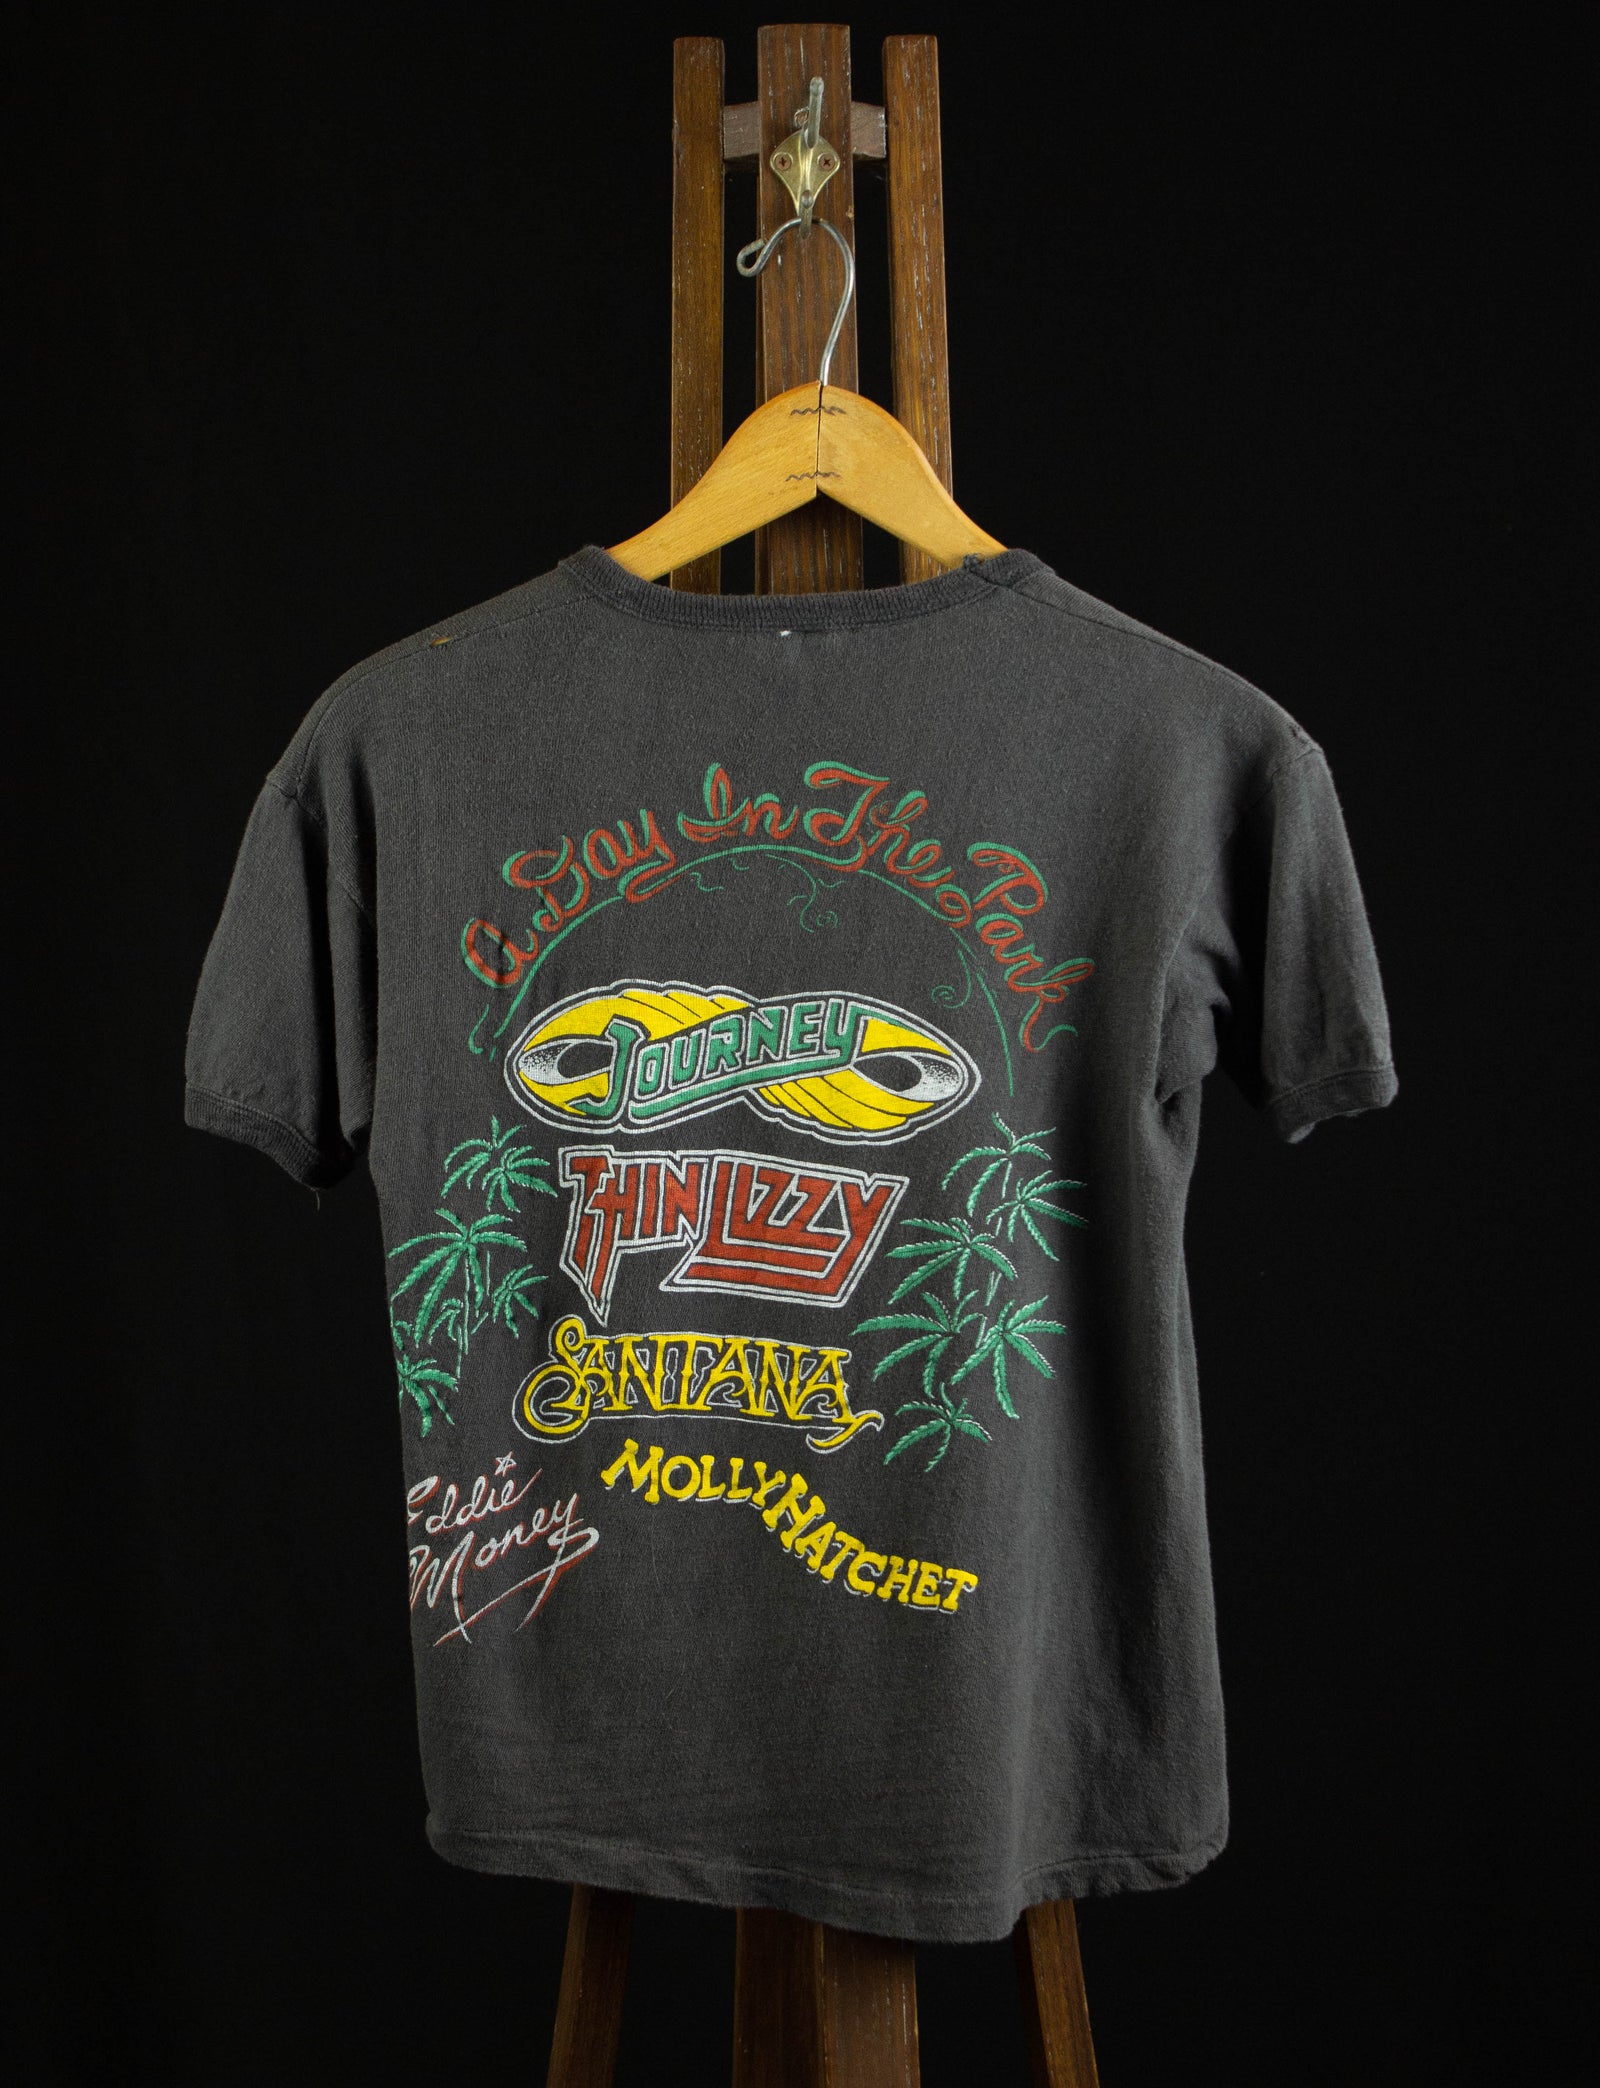 Vintage A Day In The Park Concert T Shirt 1979 Journey, Thin Lizzy, Santana, Molly Hatchet and Eddie Money Parking Lot Bootleg XS